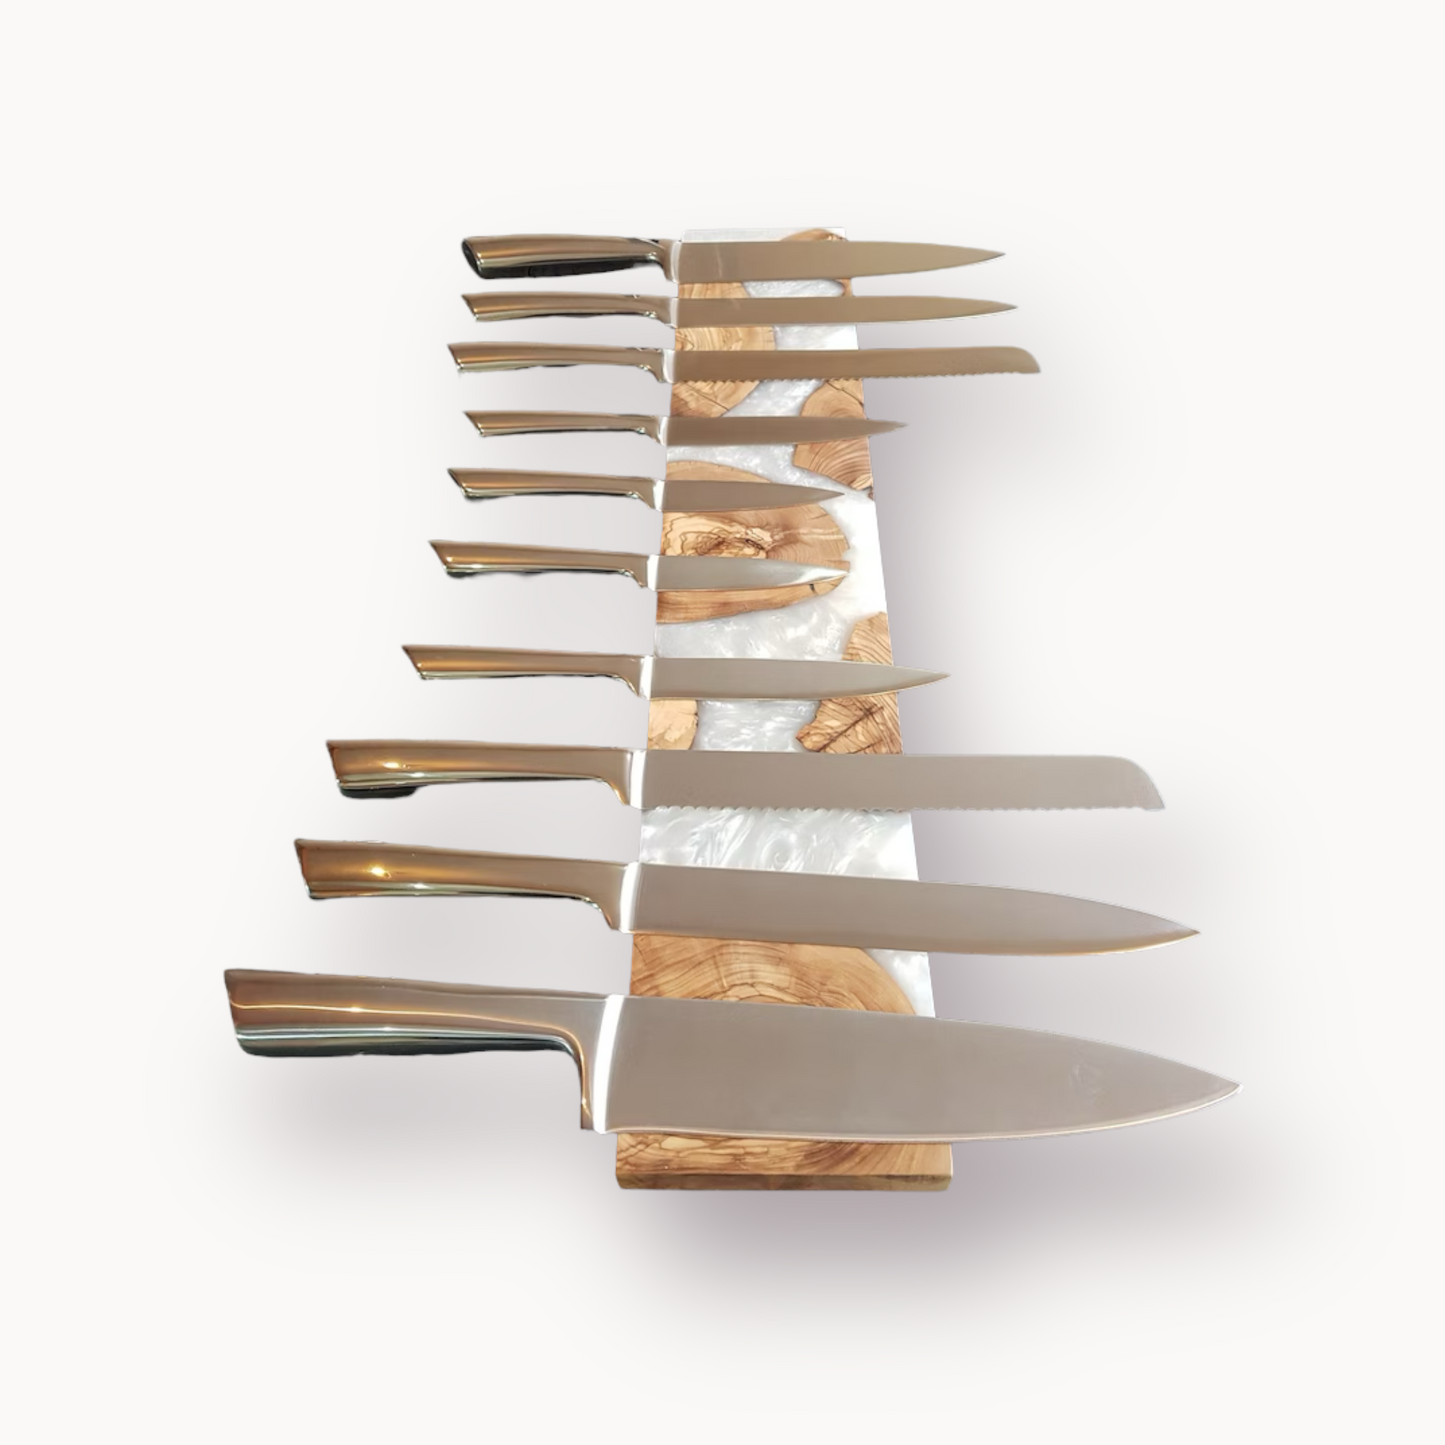 Magnetic Knife Holder for Wall - Stainless Steel Philippines